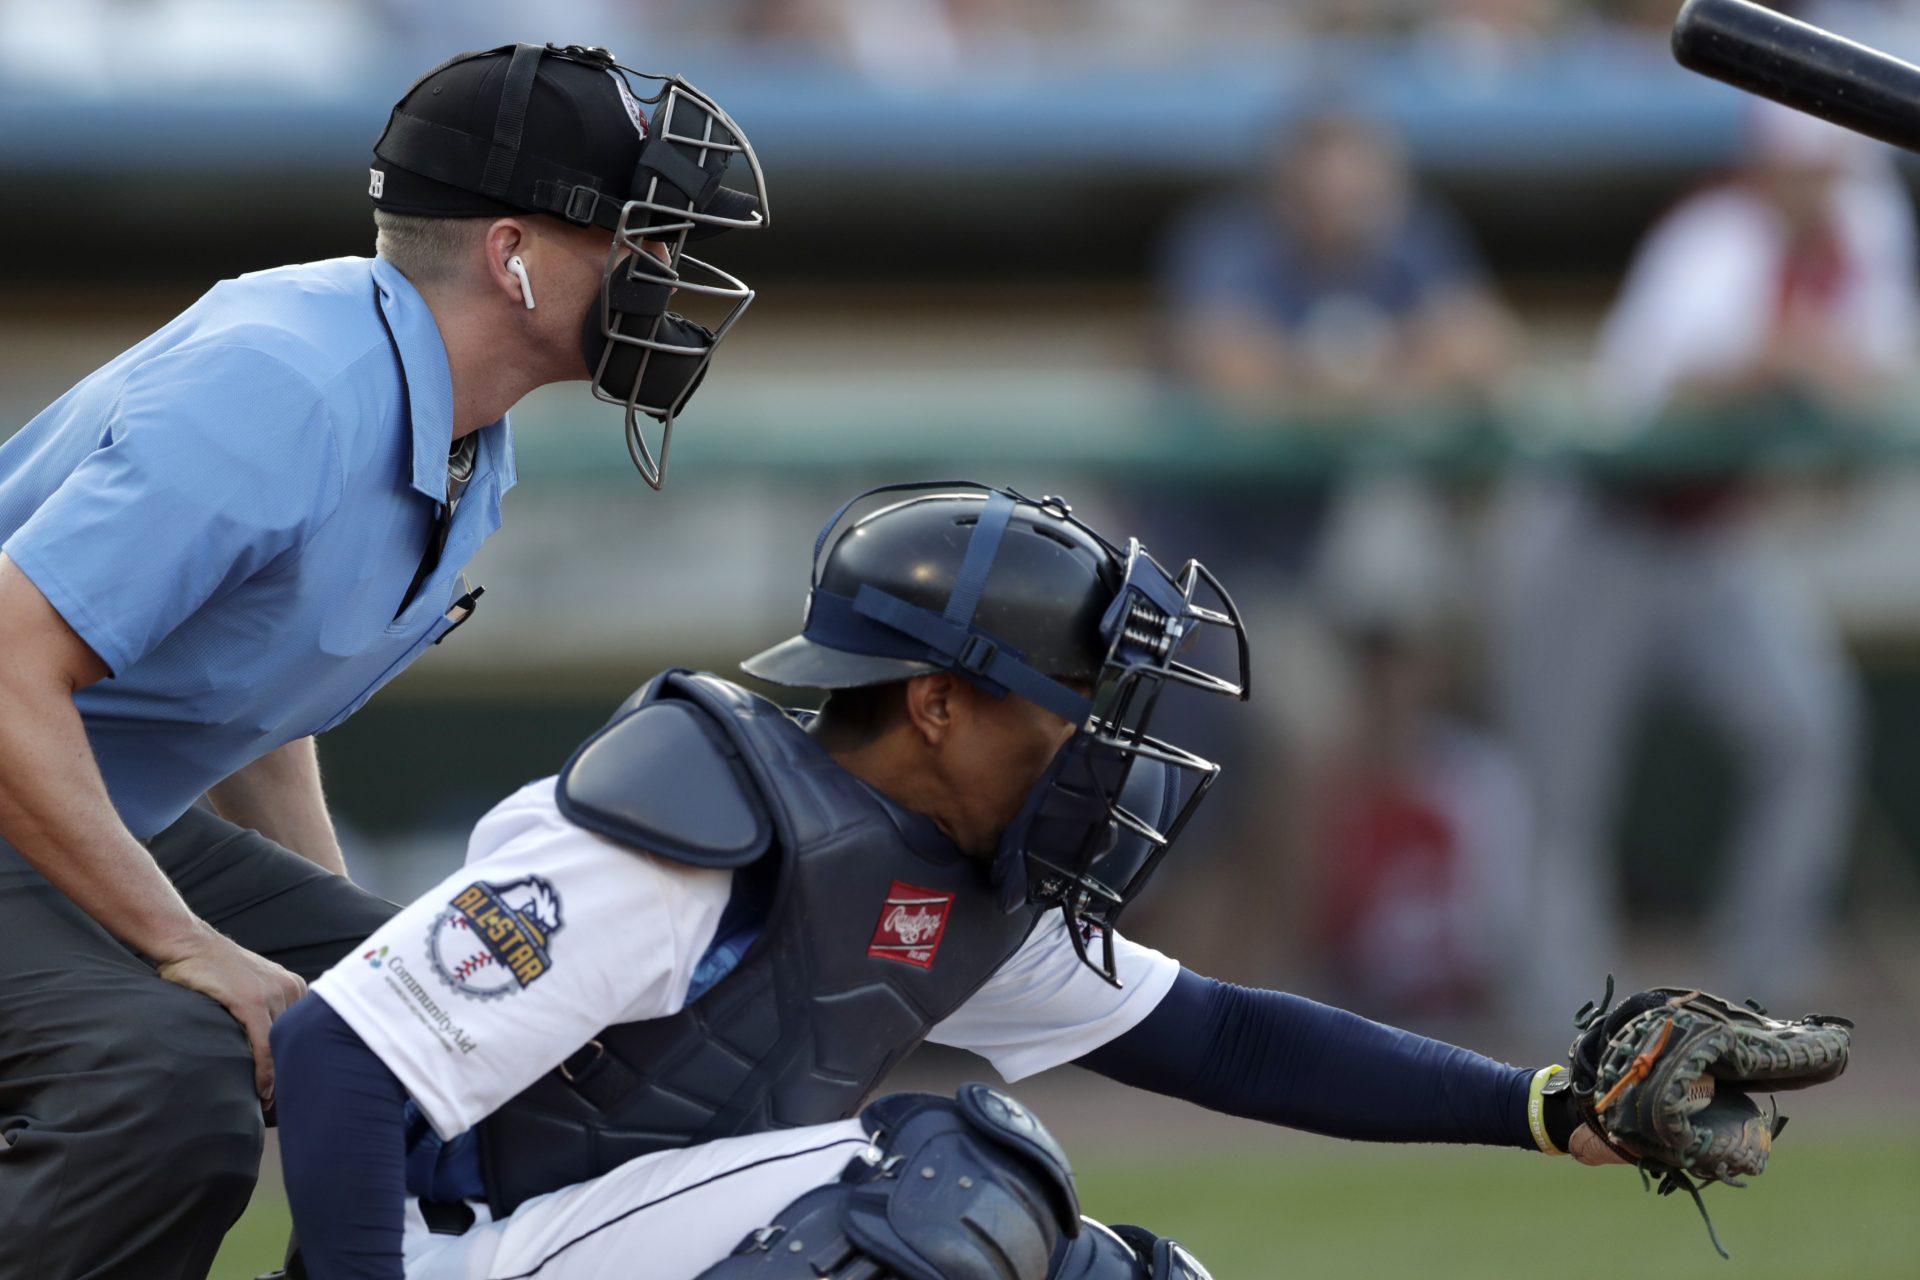 Home plate umpire Brian deBrauwere, left, huddles behind Freedom Division catcher James Skelton, of the York Revolution, as the official wears an earpiece during the first inning of the Atlantic League All-Star minor league baseball game, Wednesday, July 10, 2019, in York, Pa.